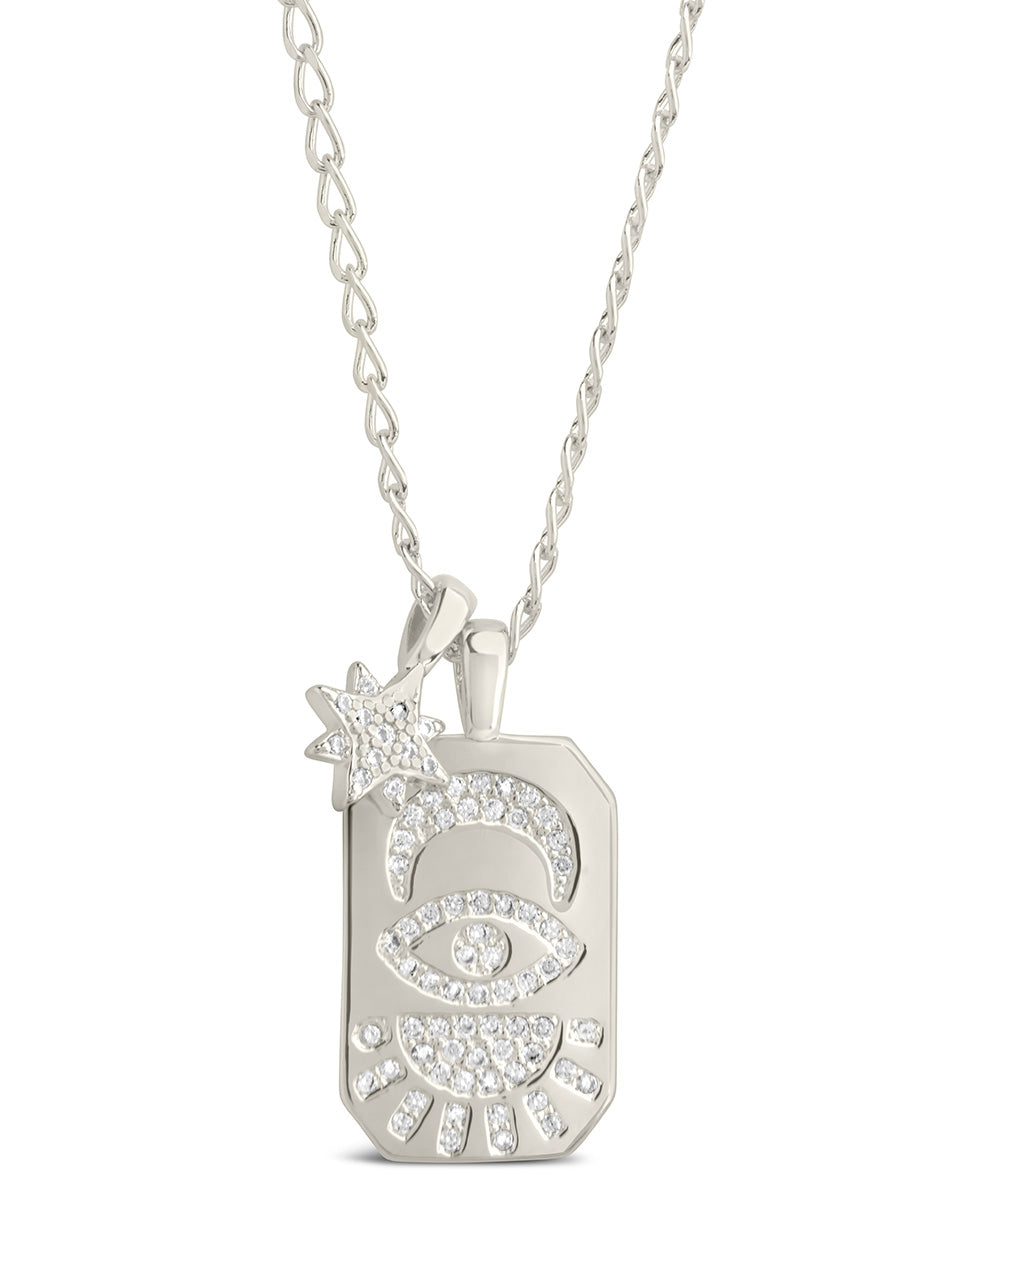 Galexi Pendant Necklace Sterling Forever Silver 